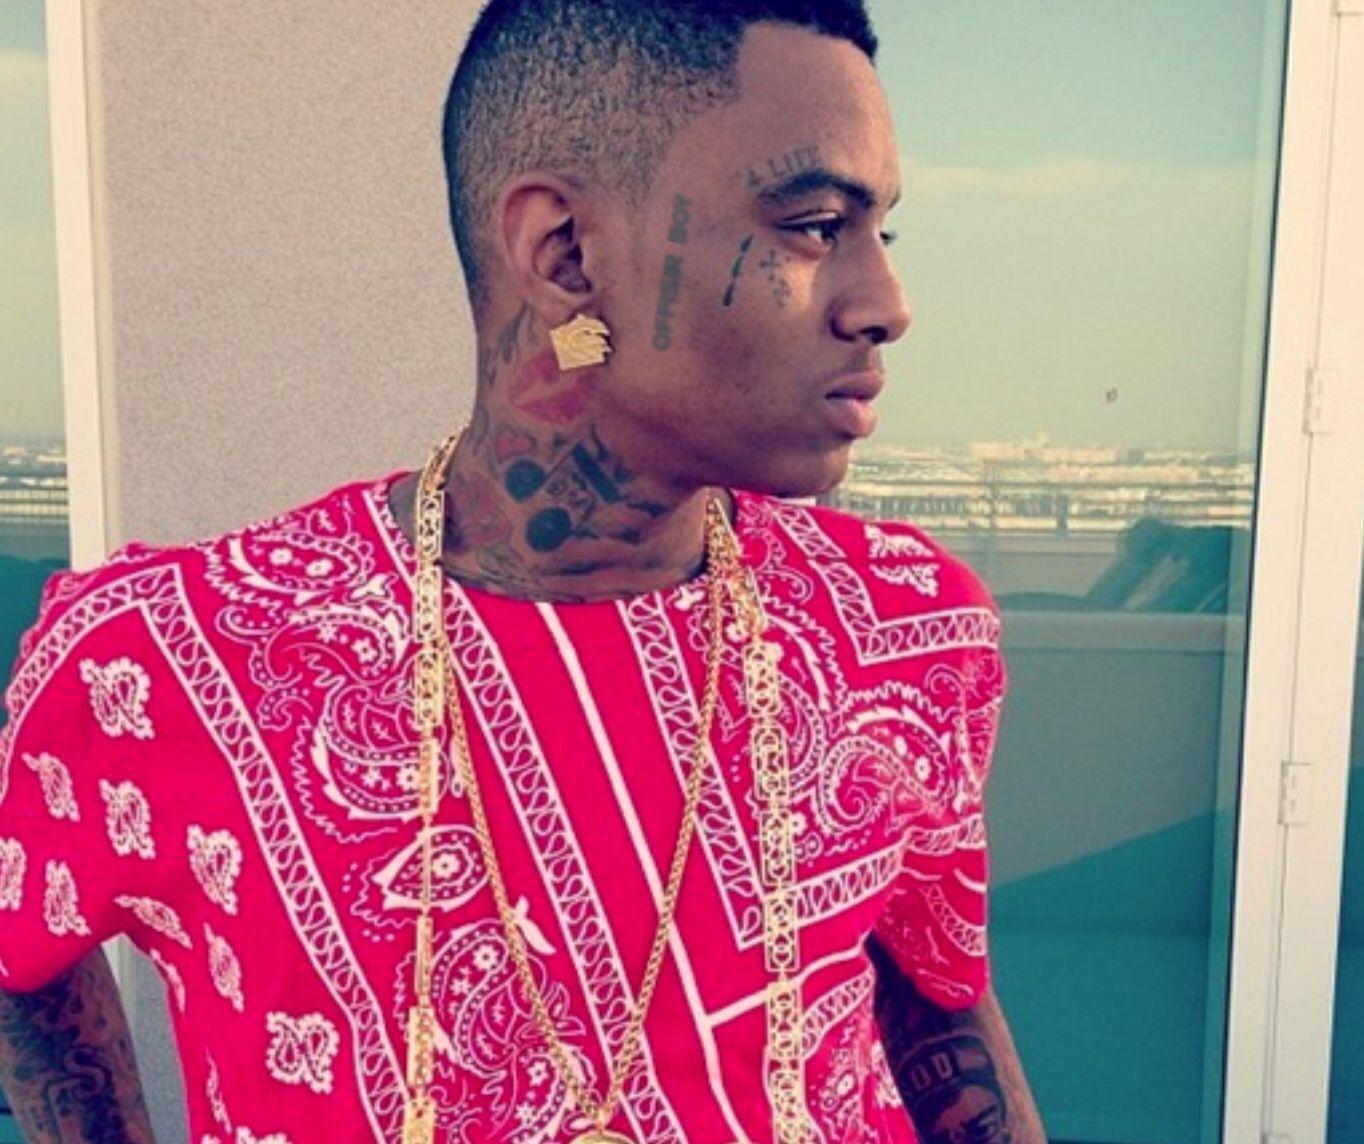 Soulja Boy To Change Stage Name to Offisir Boy And Tattooed It On